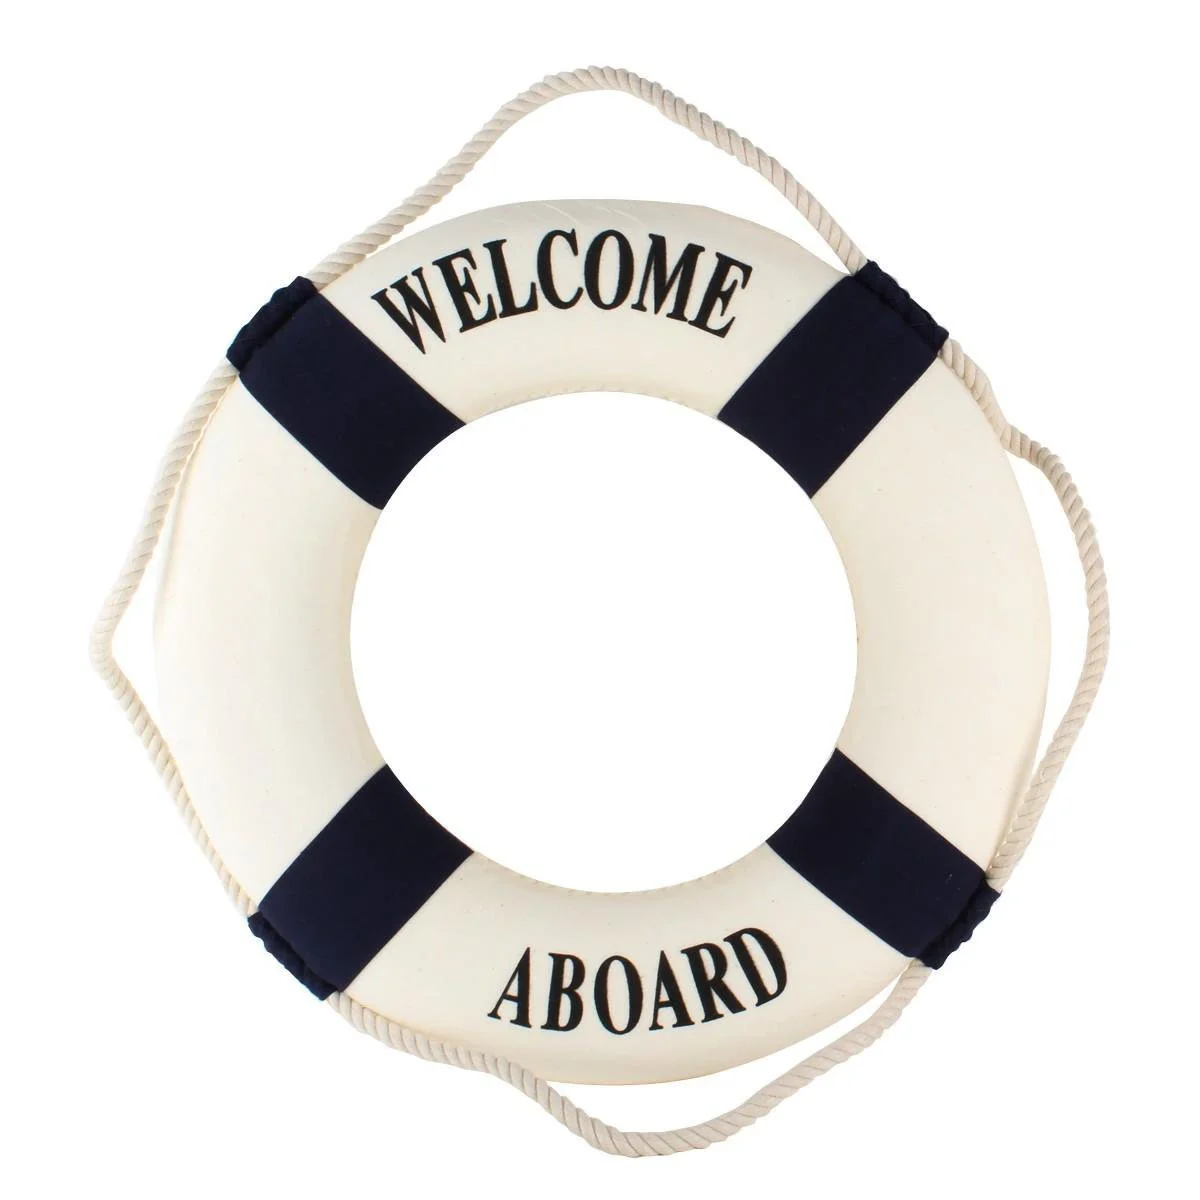 

Decoration Decor Life Buoy Ring Decorations Nautical Beach Cruise Wall Home Theme Preserver Hanging House Bedroom Accessories